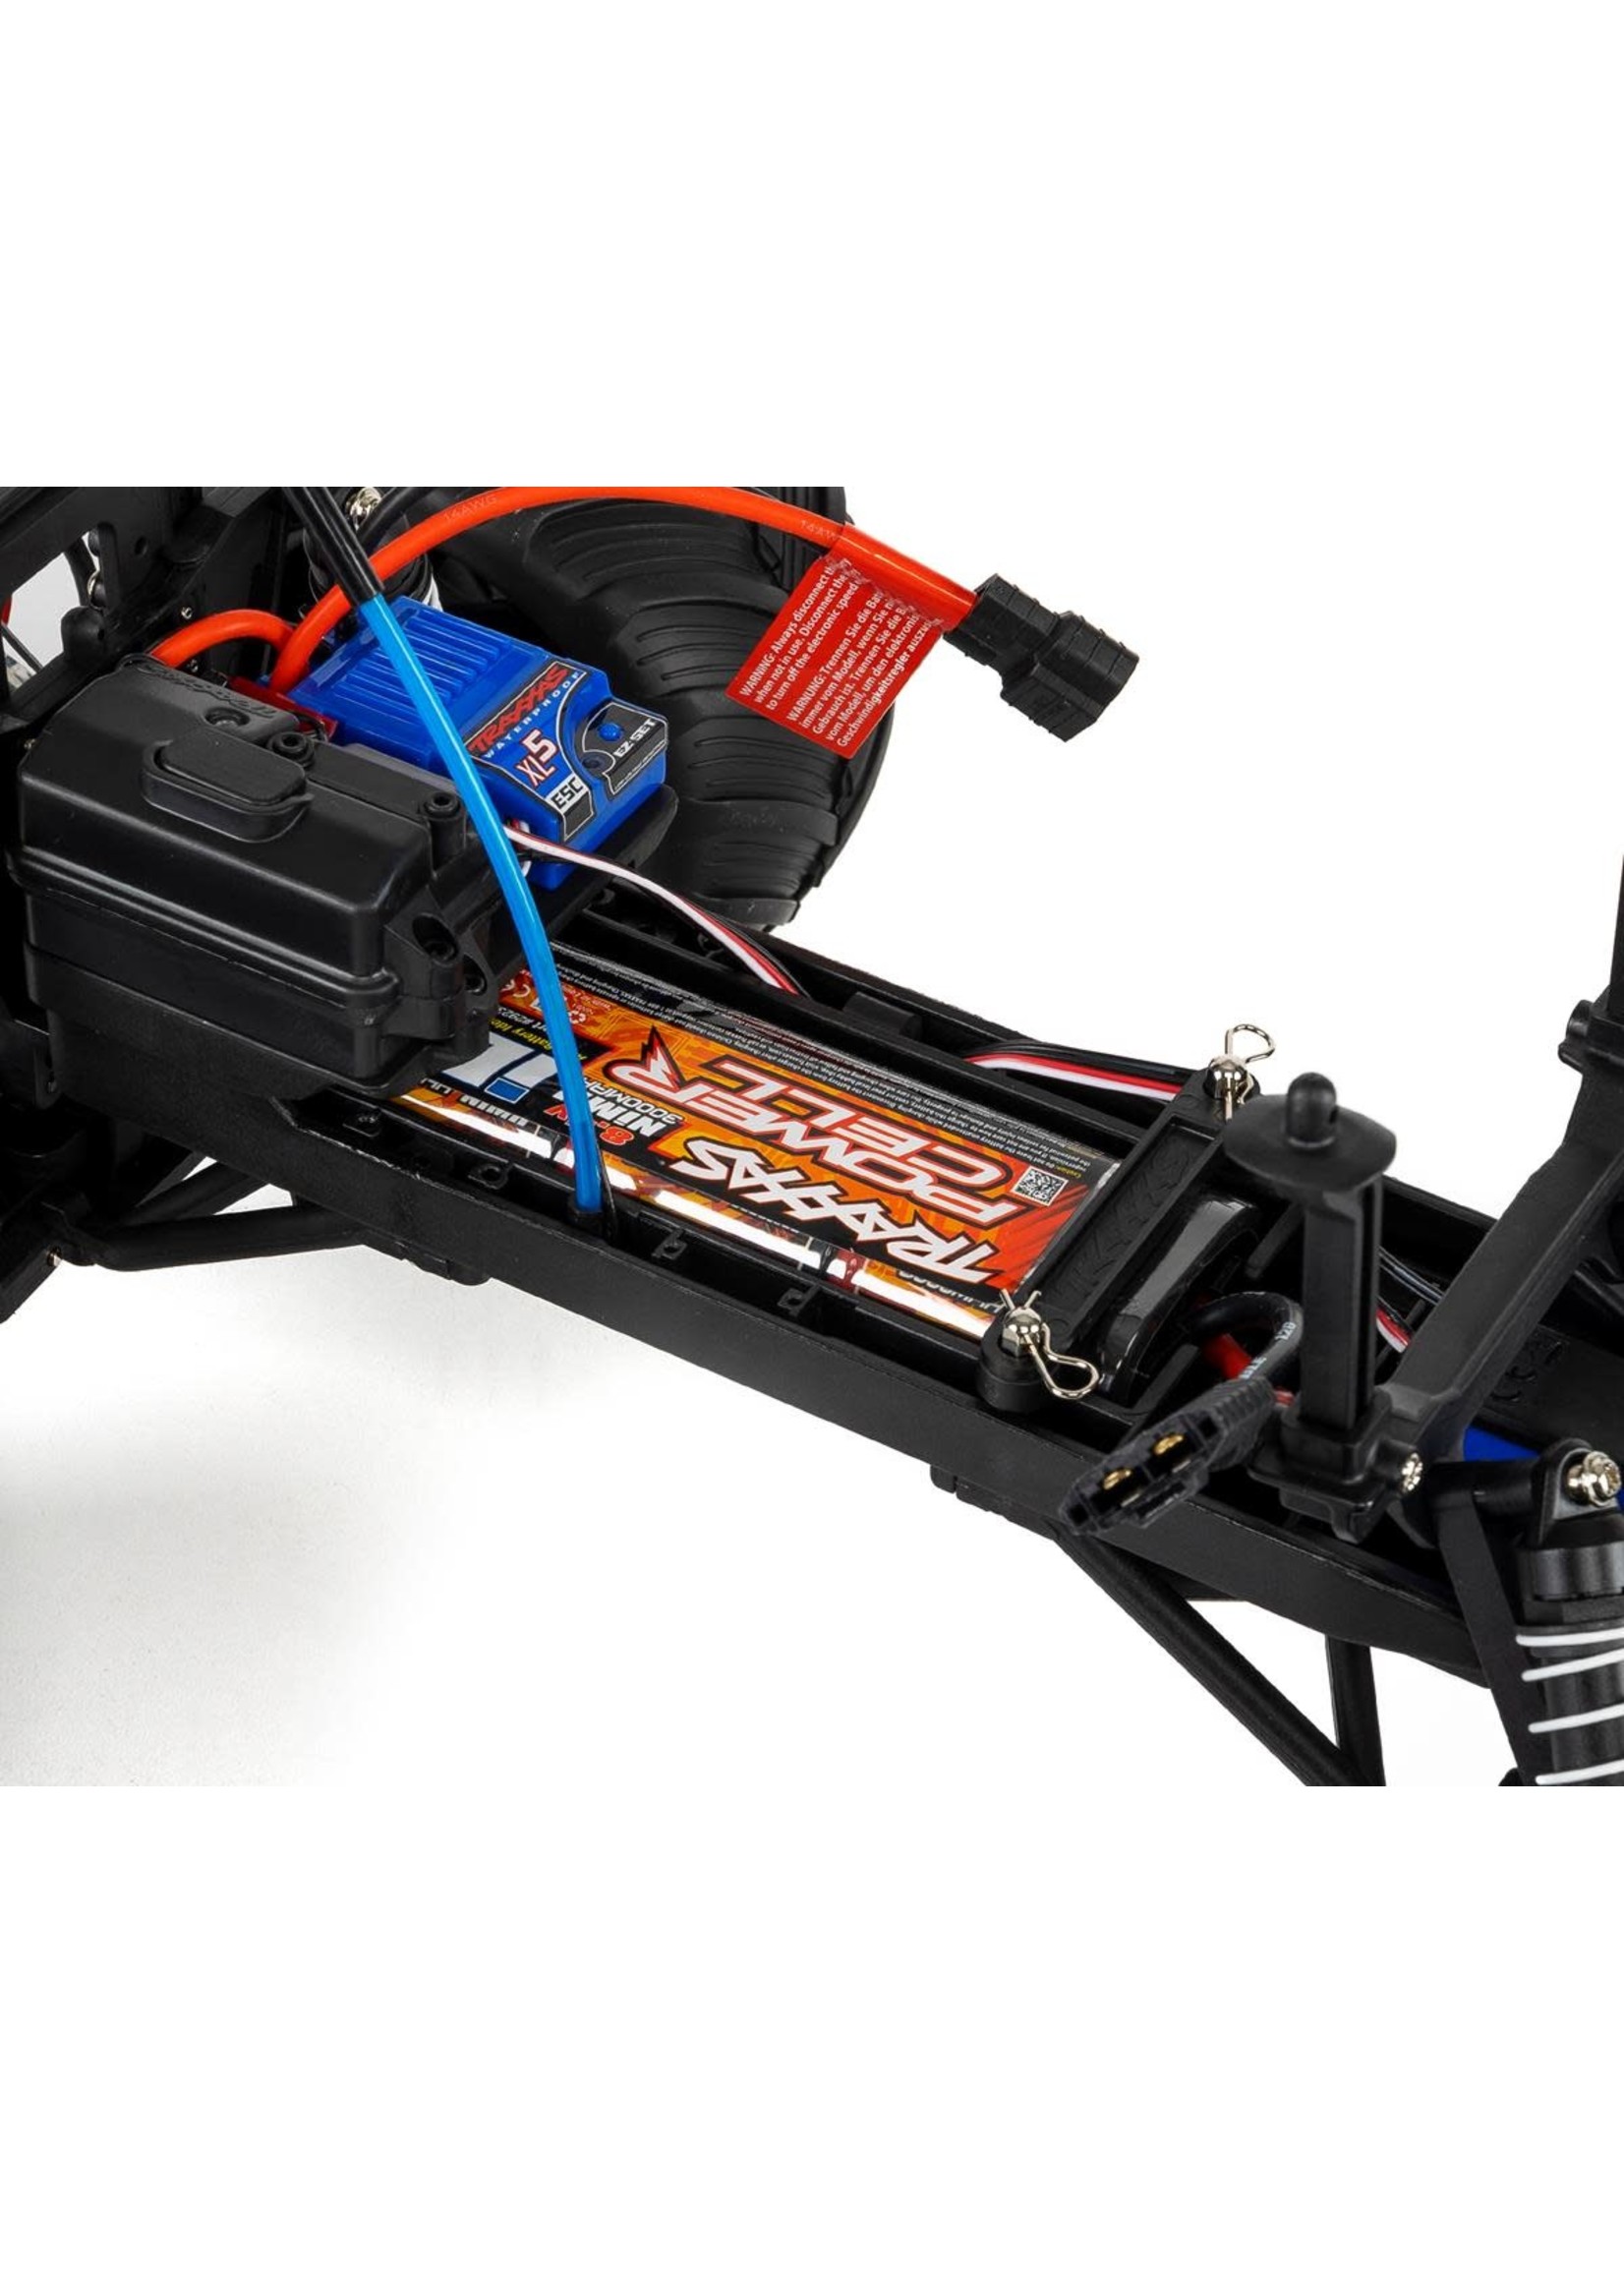 Traxxas 36034-61-R5 Traxxas "Bigfoot" No.1 Original Monster RTR 1/10 2WD Monster Truck w/LED Lights, TQ 2.4GHz Radio, Battery & DC Charger